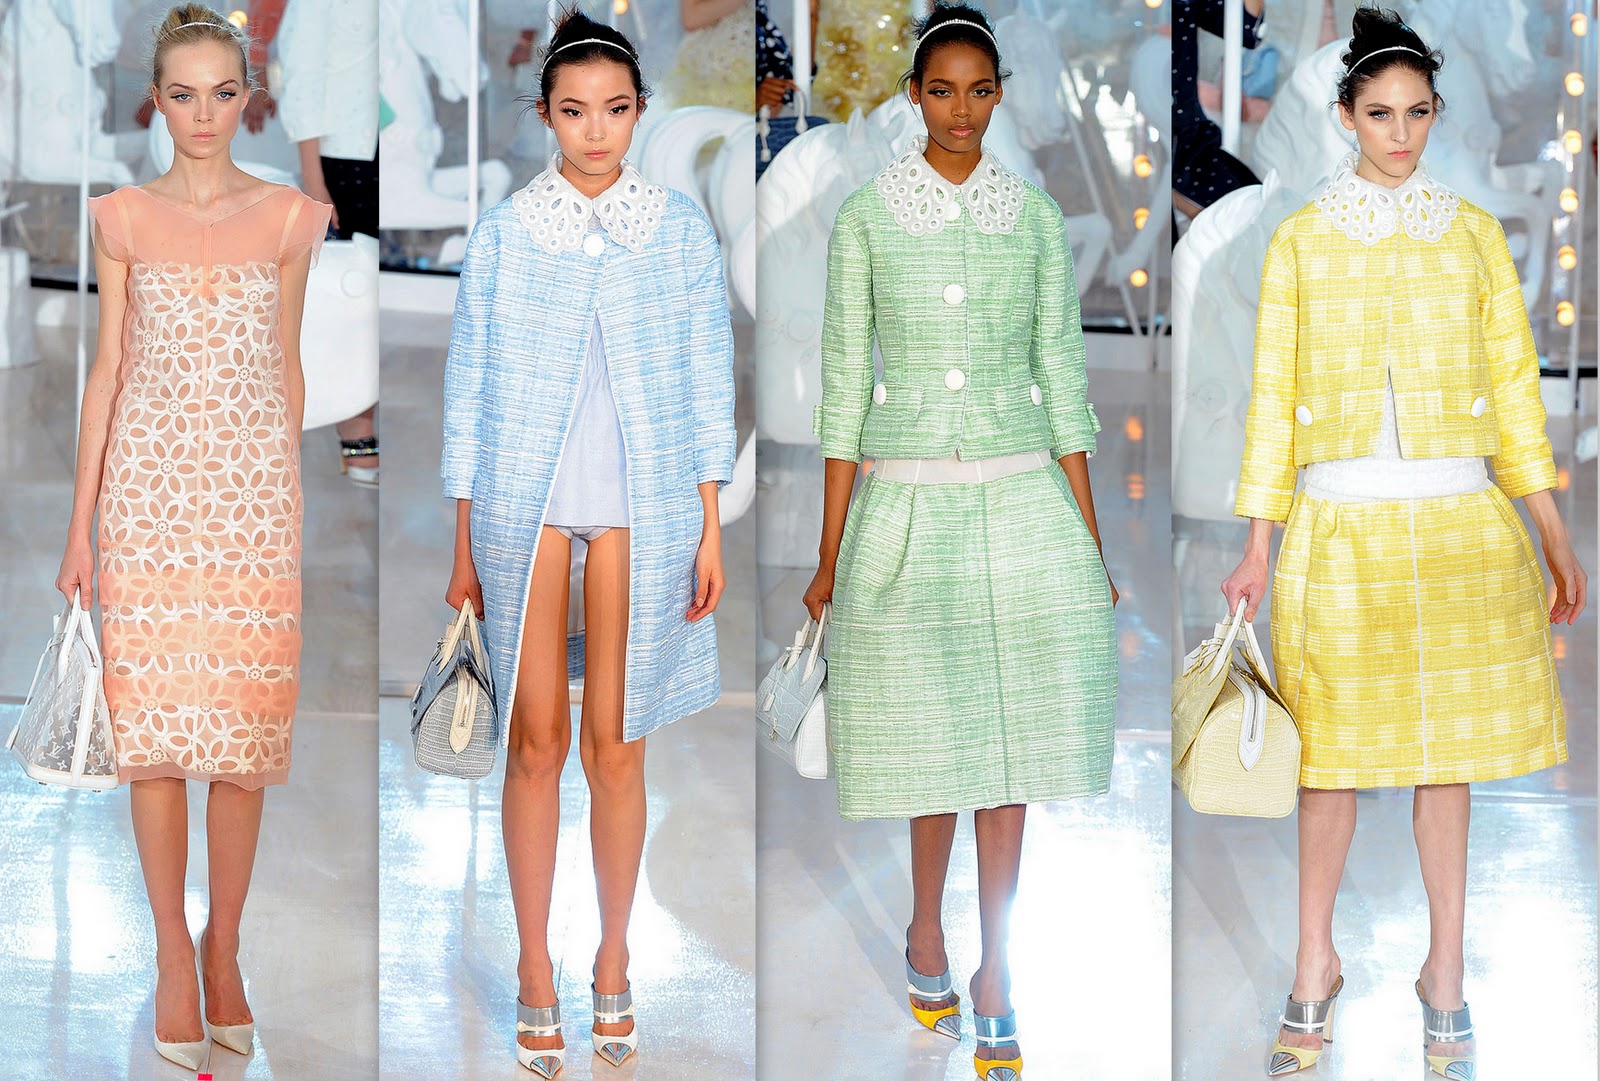 Marc Jacobs Preps for Spring Showers at Louis Vuitton With